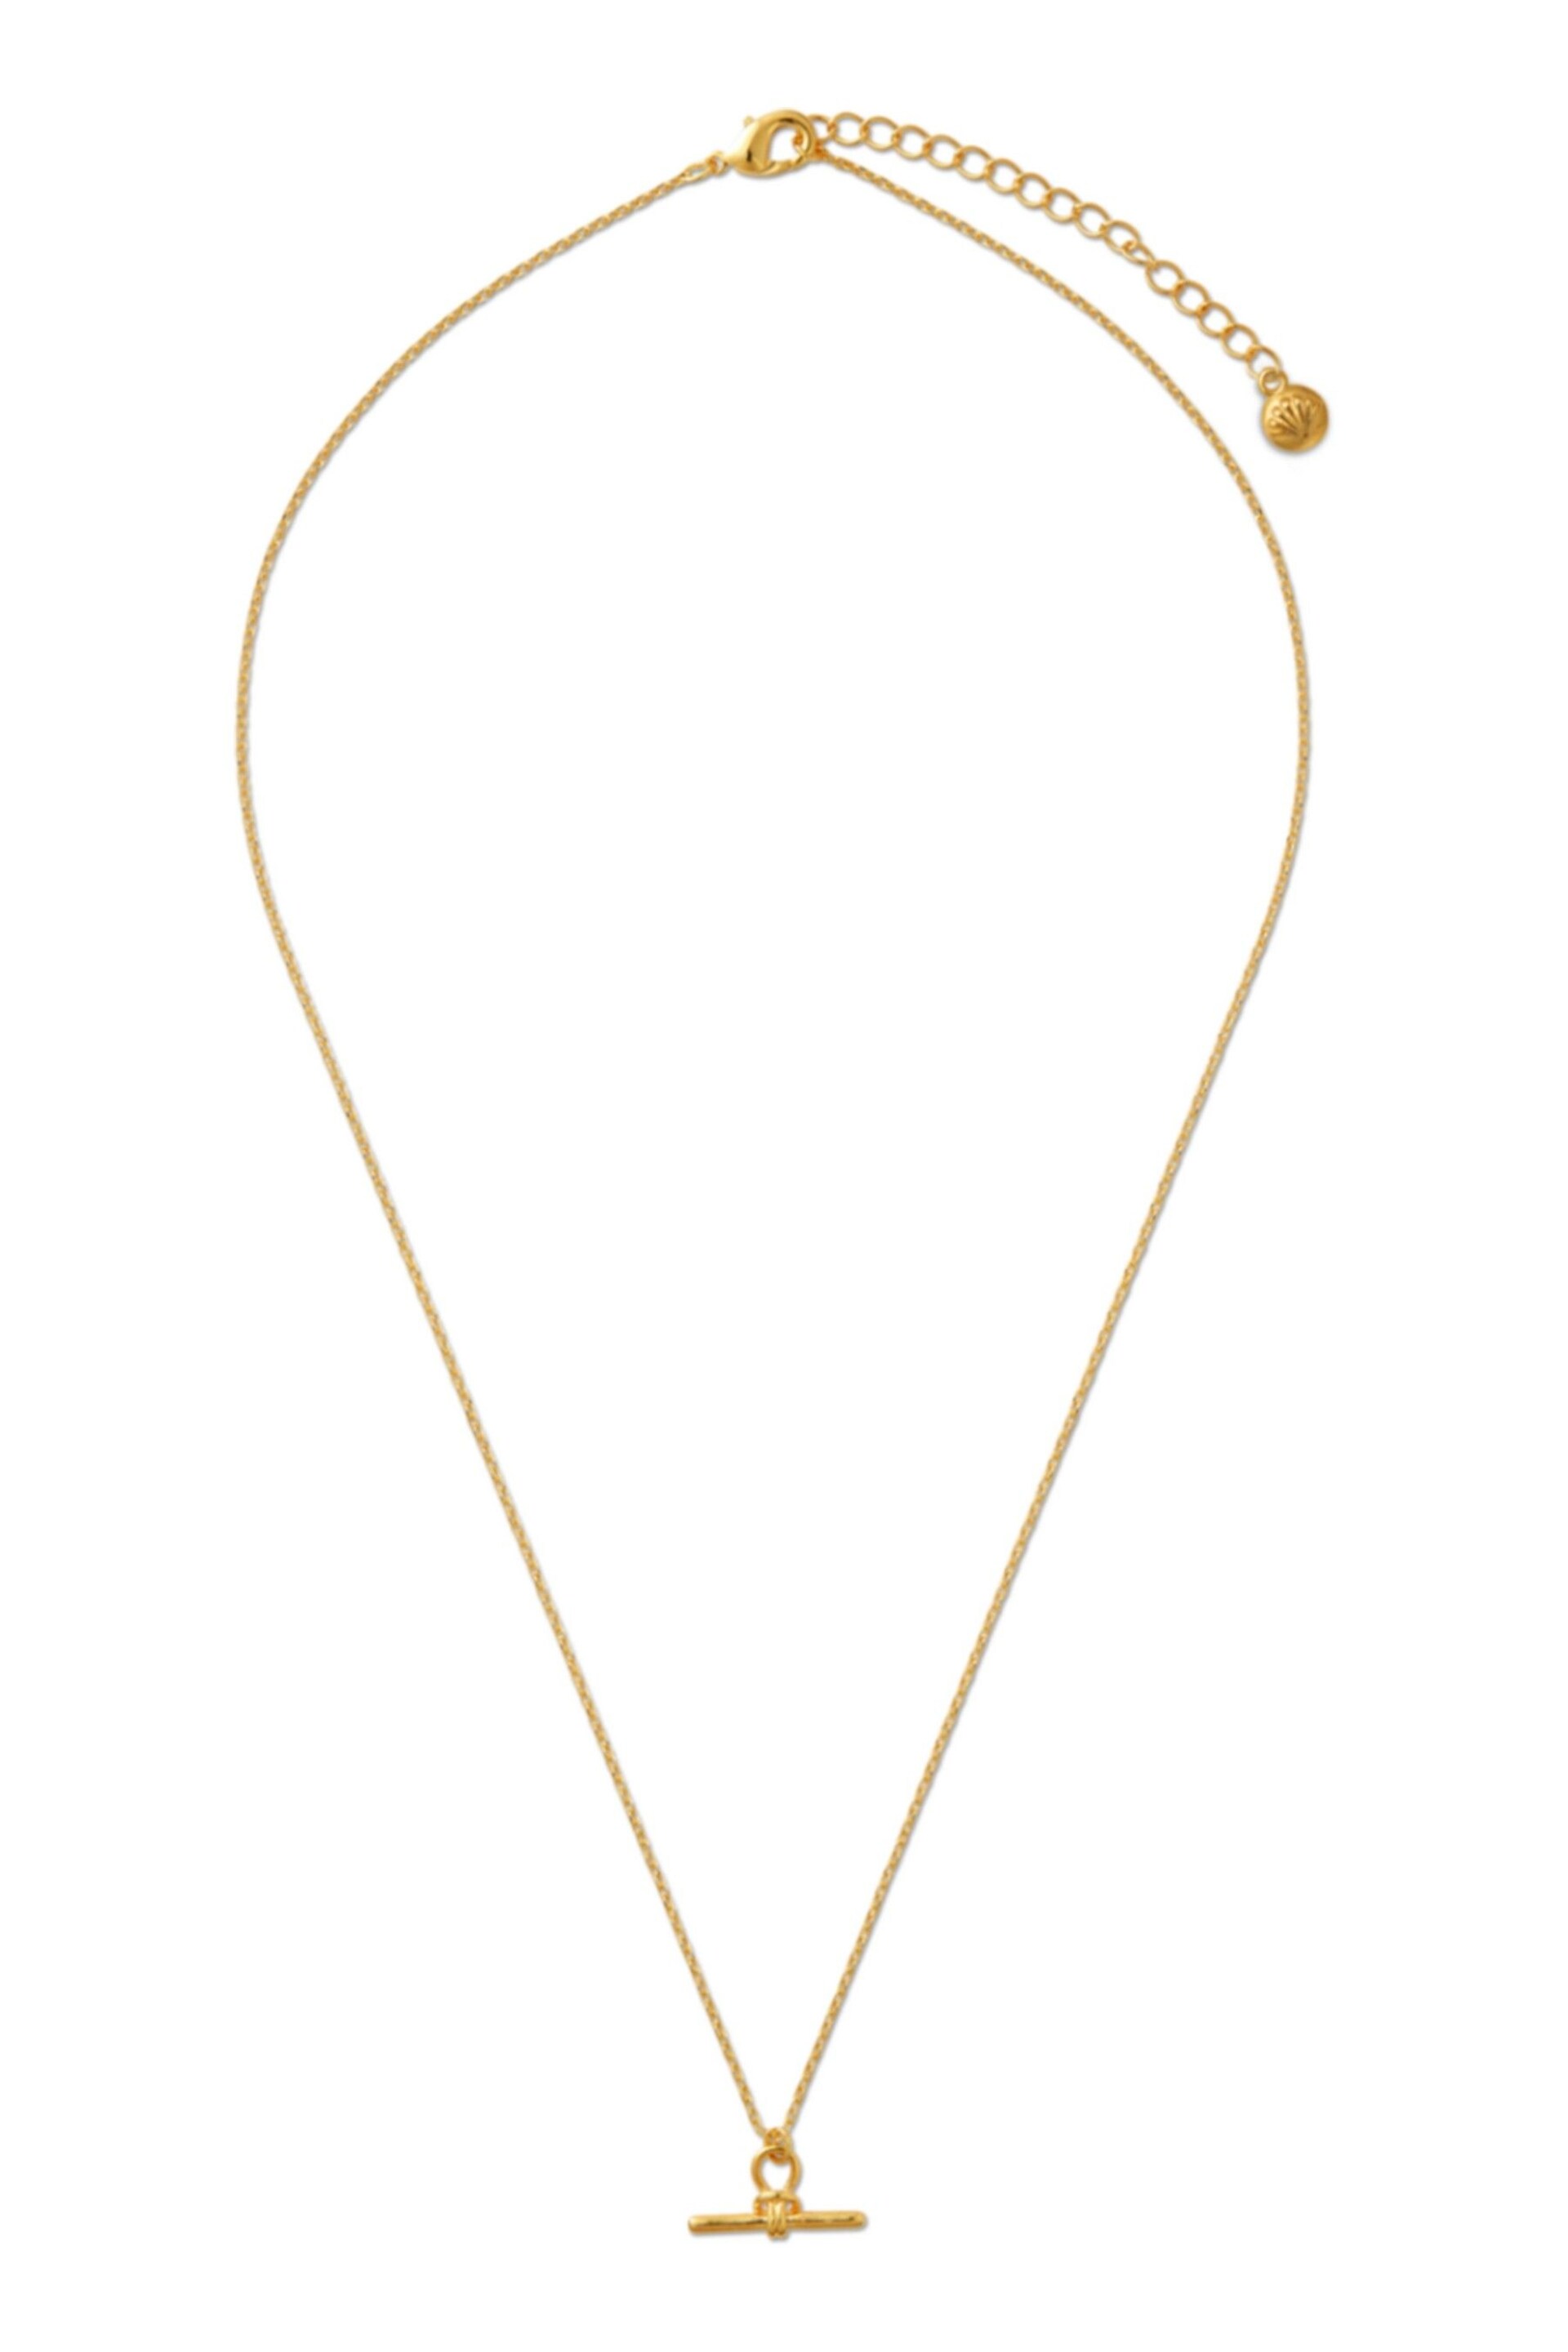 Orelia London 18k Gold Plating Dainty T-Bar Knot Necklace - Image 1 of 3